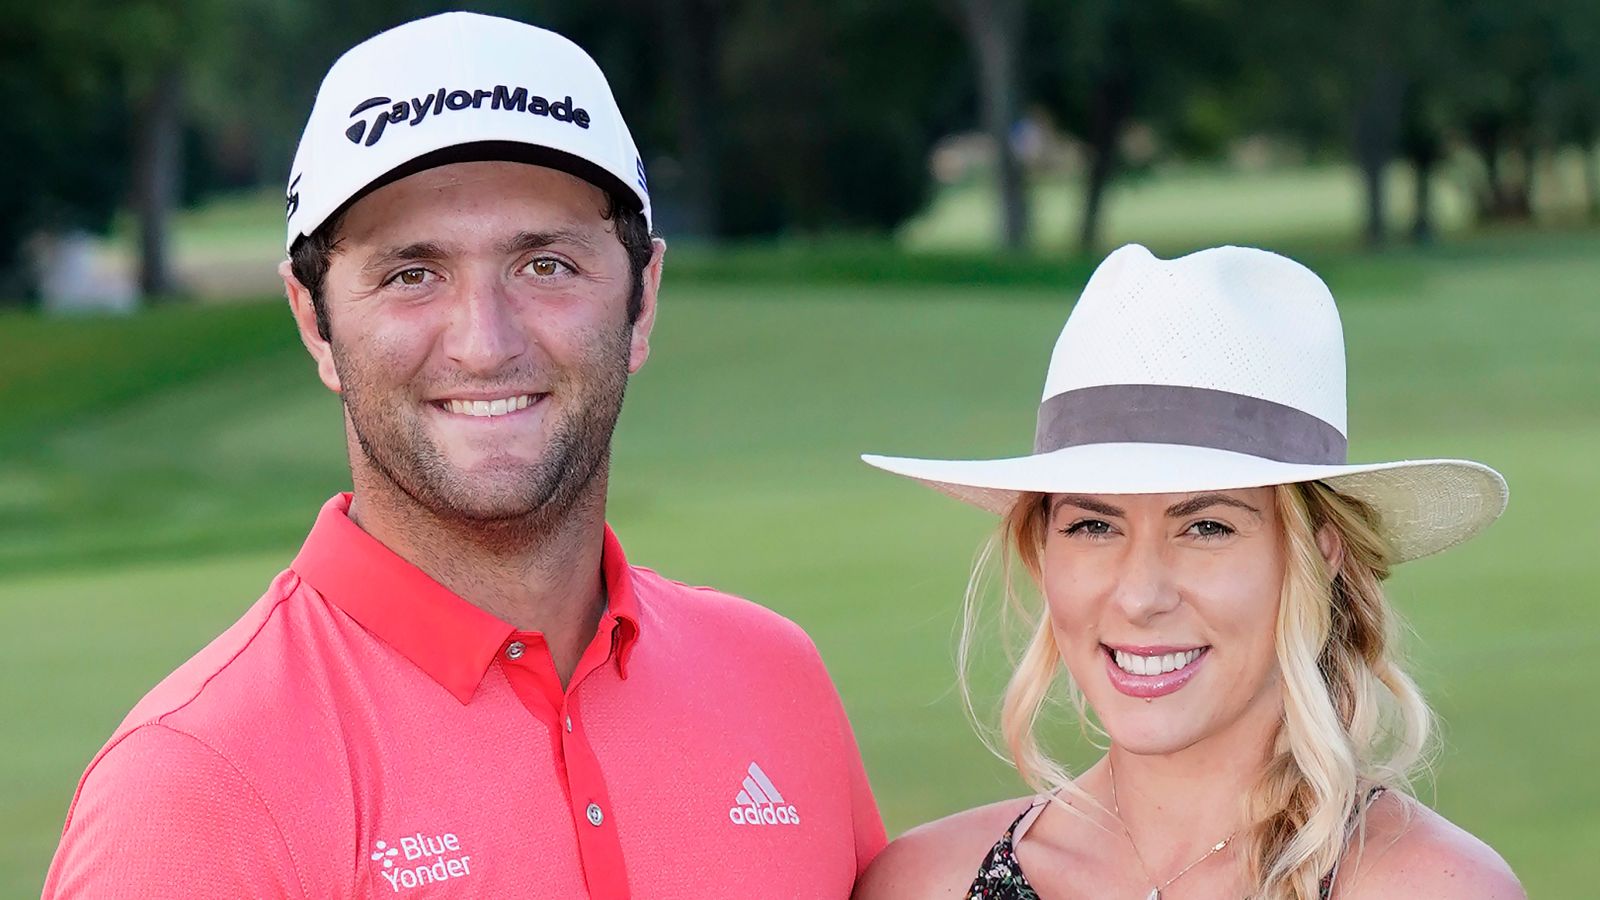 Jon Rahm says he'll bolt tournament to be at birth of his son